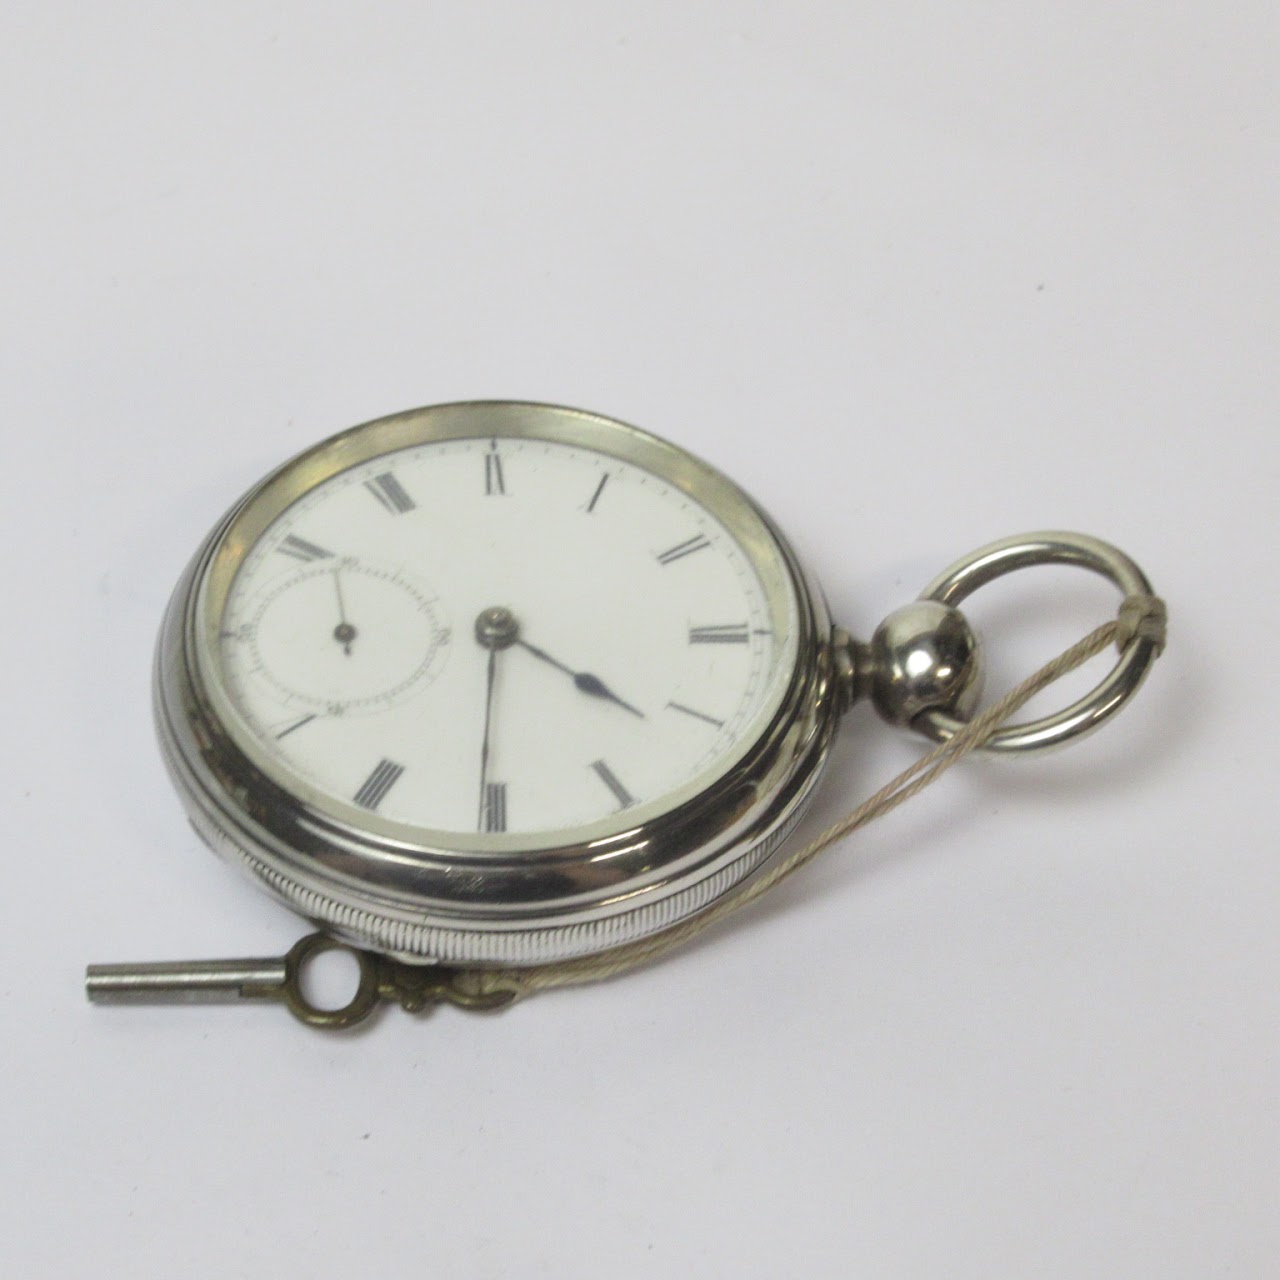 Coin Silver Home Watch Co. (American Waltham) Pocket Watch